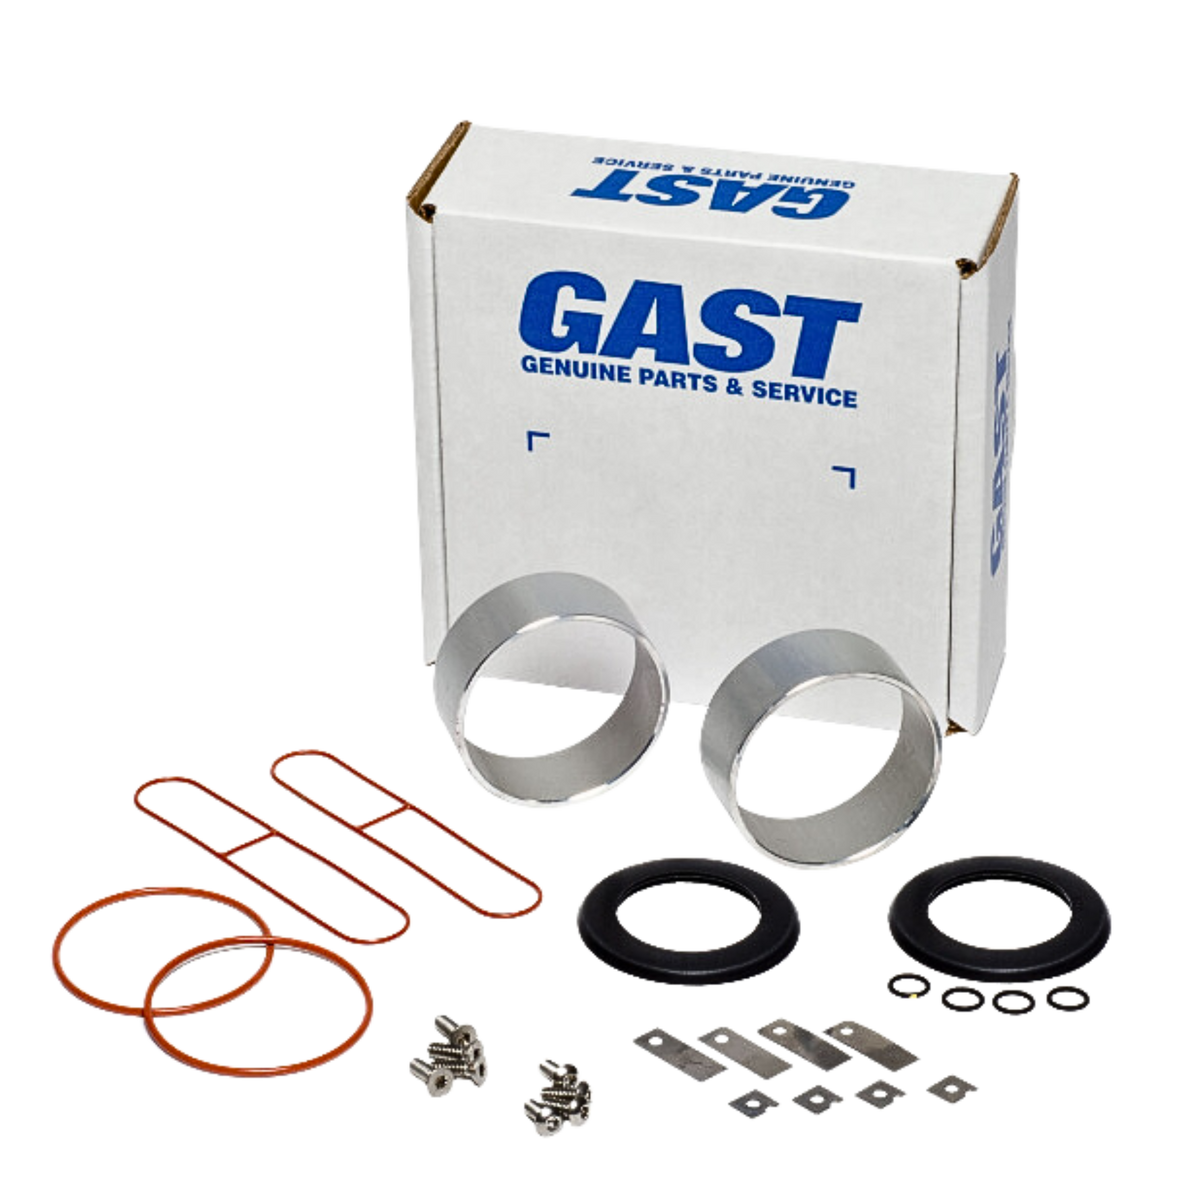 Gast | 71R Twin Cylinder Service Kit | K557D used on gast product line